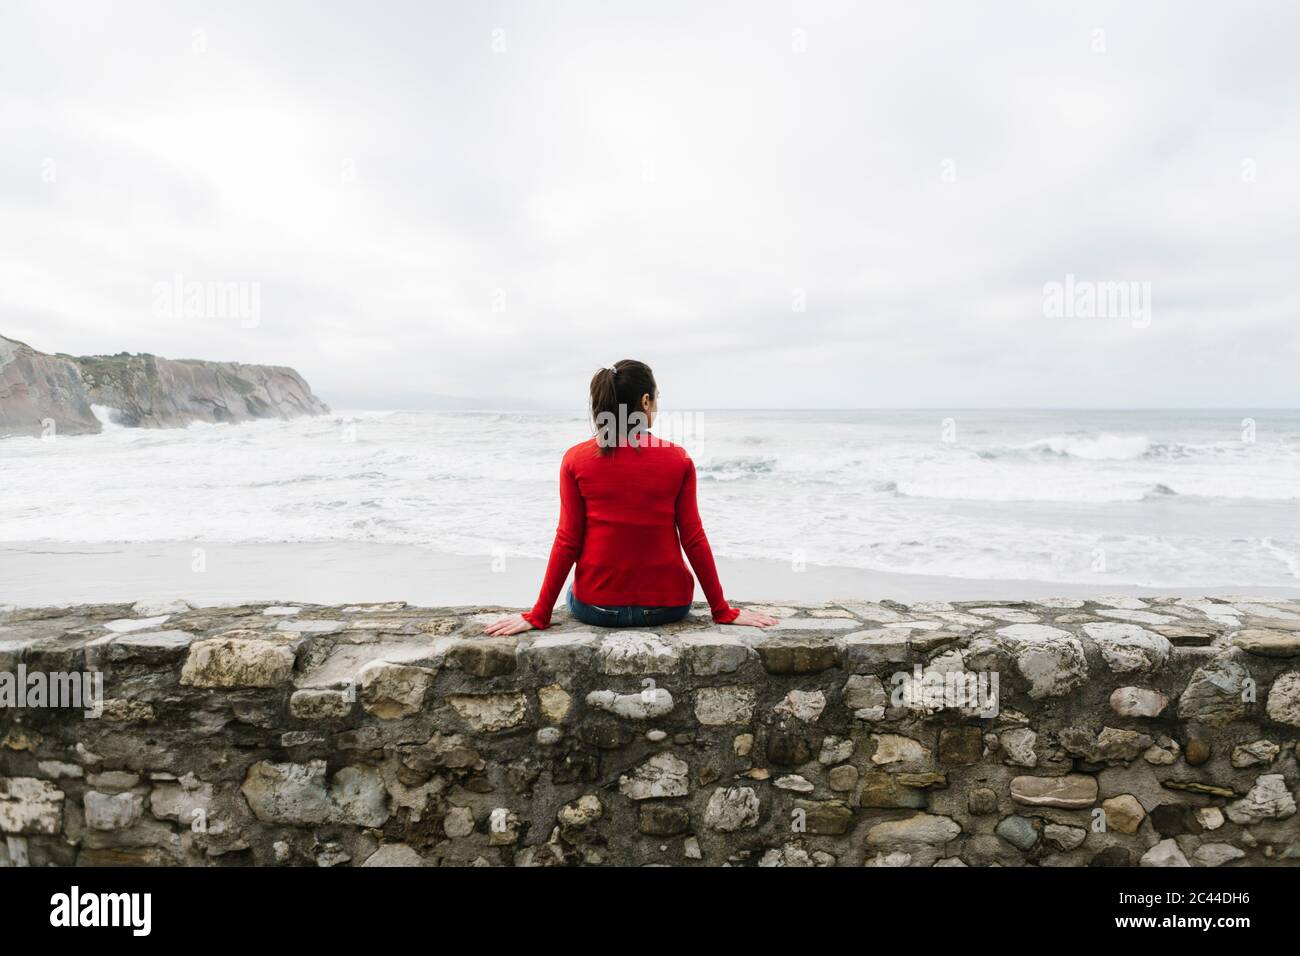 Rear view of relaxed female tourist sitting on retaining wall while looking at sea against sky, Itzurun, Zumaia, Spanish Basque Country, Spain Stock Photo